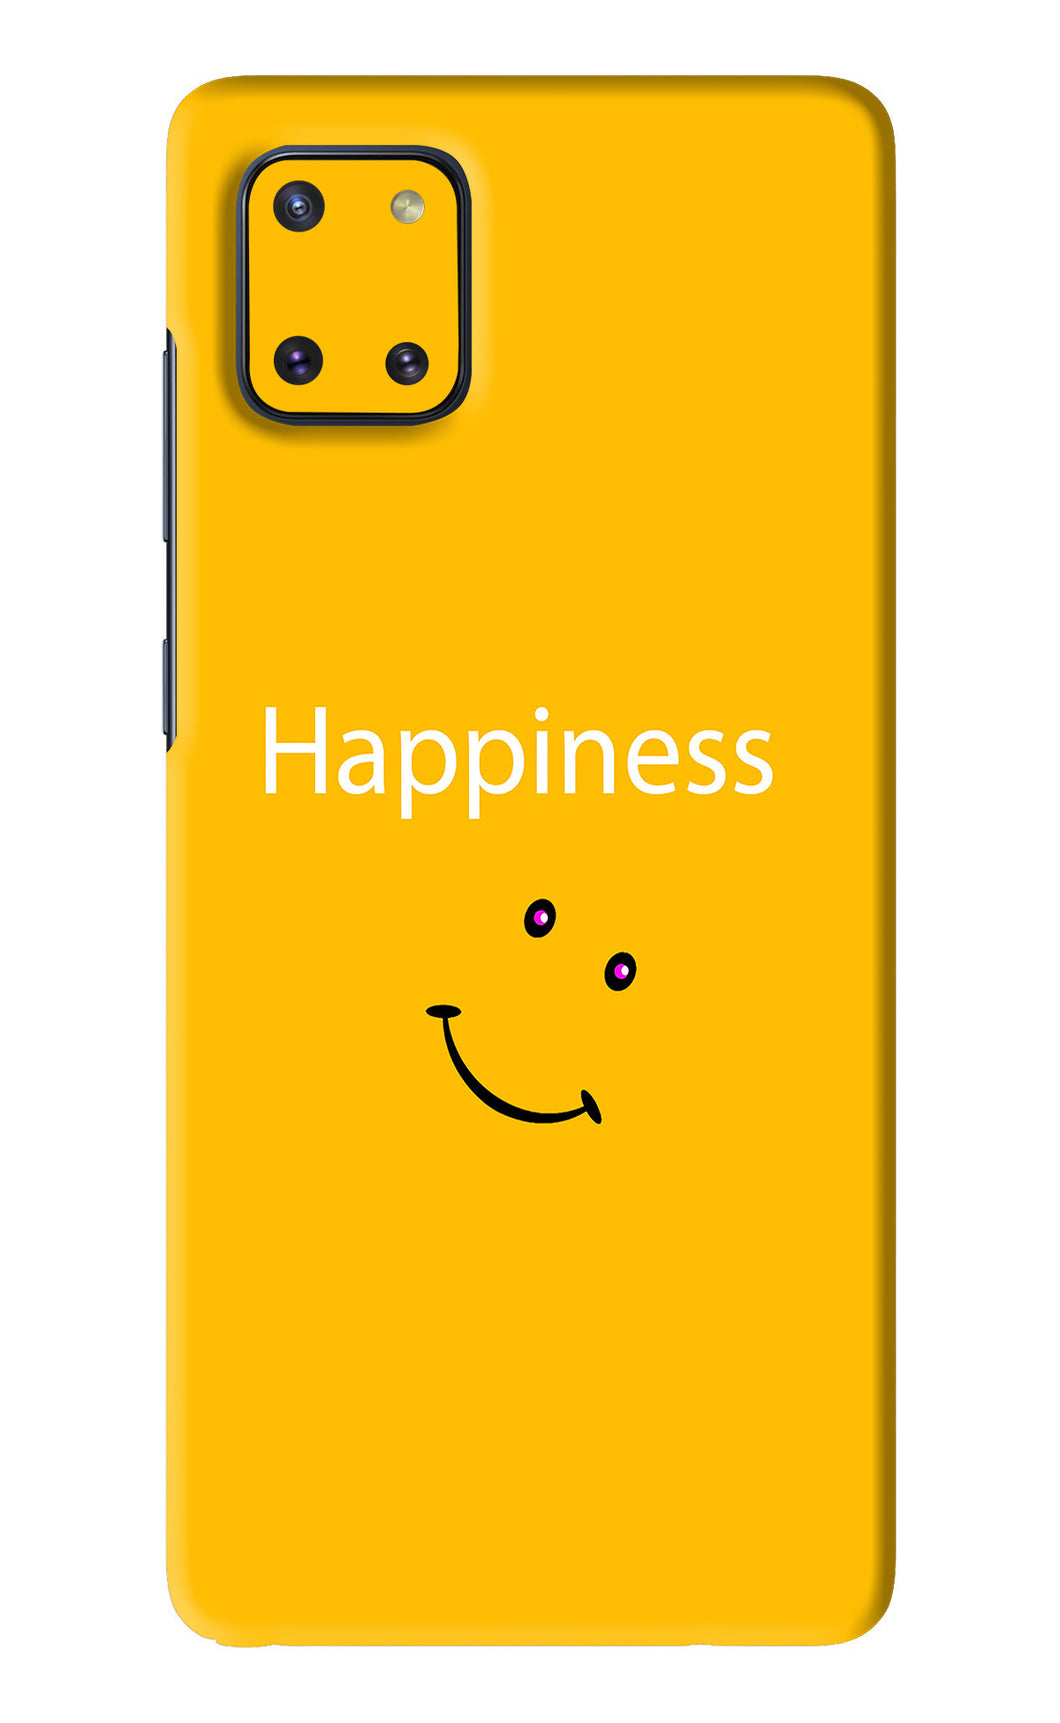 Happiness With Smiley Samsung Galaxy Note 10 Lite Back Skin Wrap